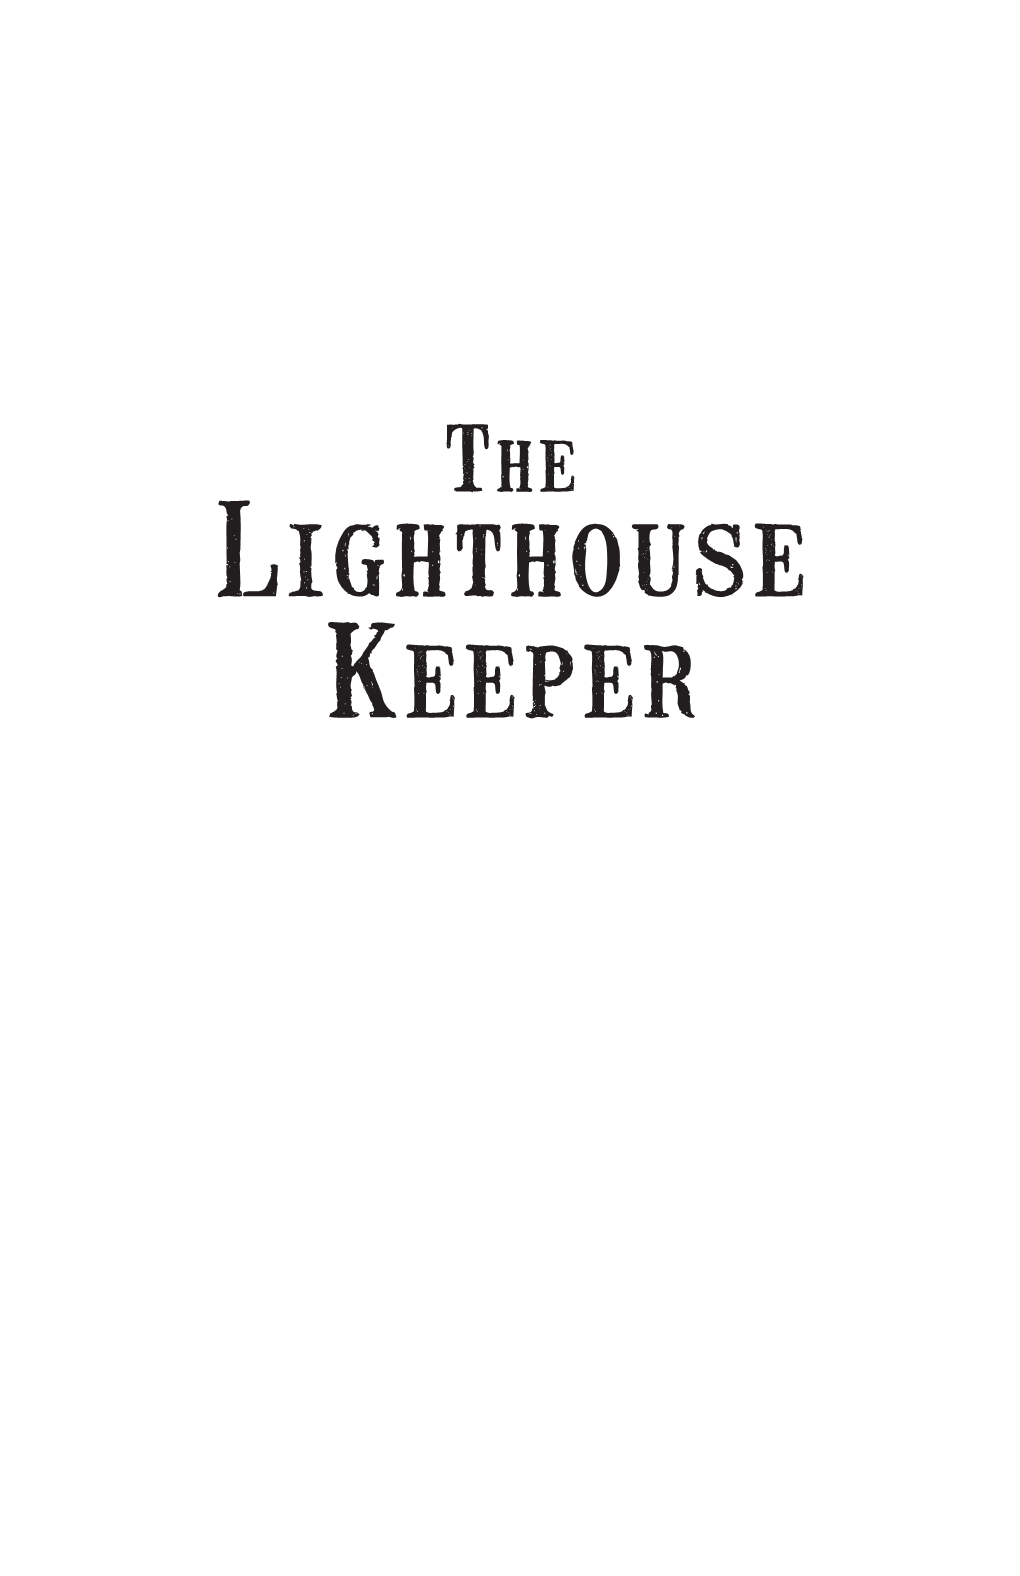 Lighthouse Keeper Ii the LIGHTHOUSE KEEPER the APPRENTICE Iii